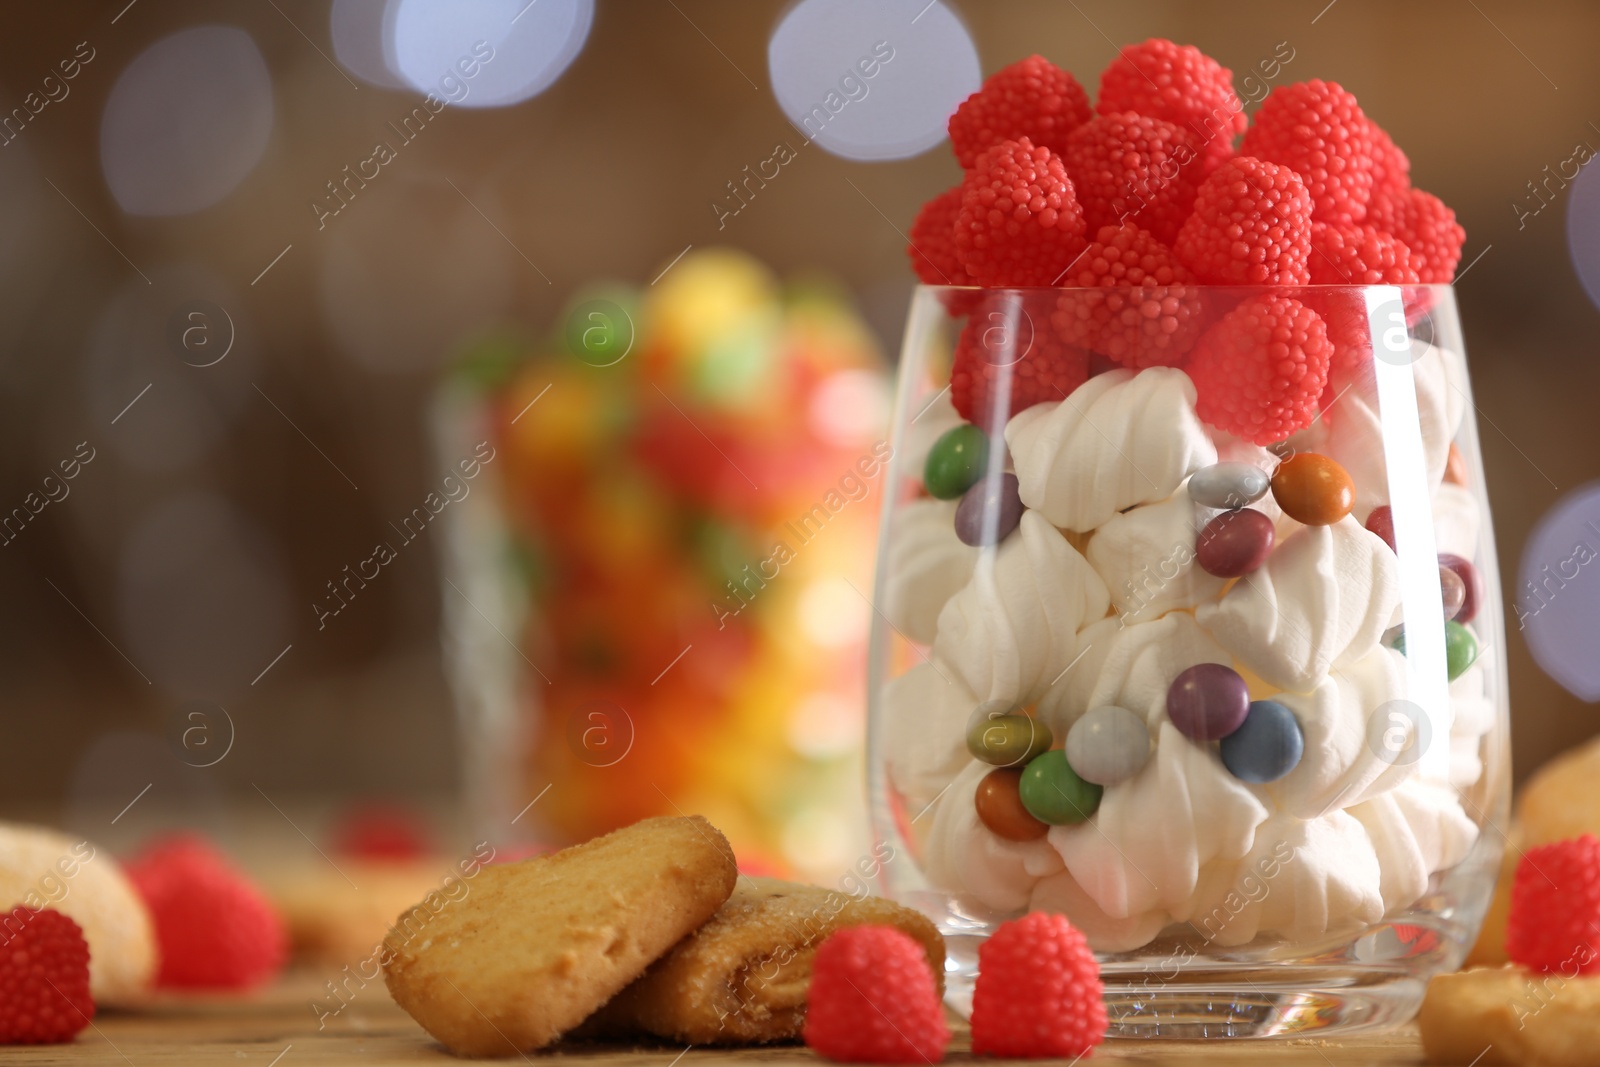 Photo of Delicious candies and cookies on wooden table against blurred background, closeup. Space for text